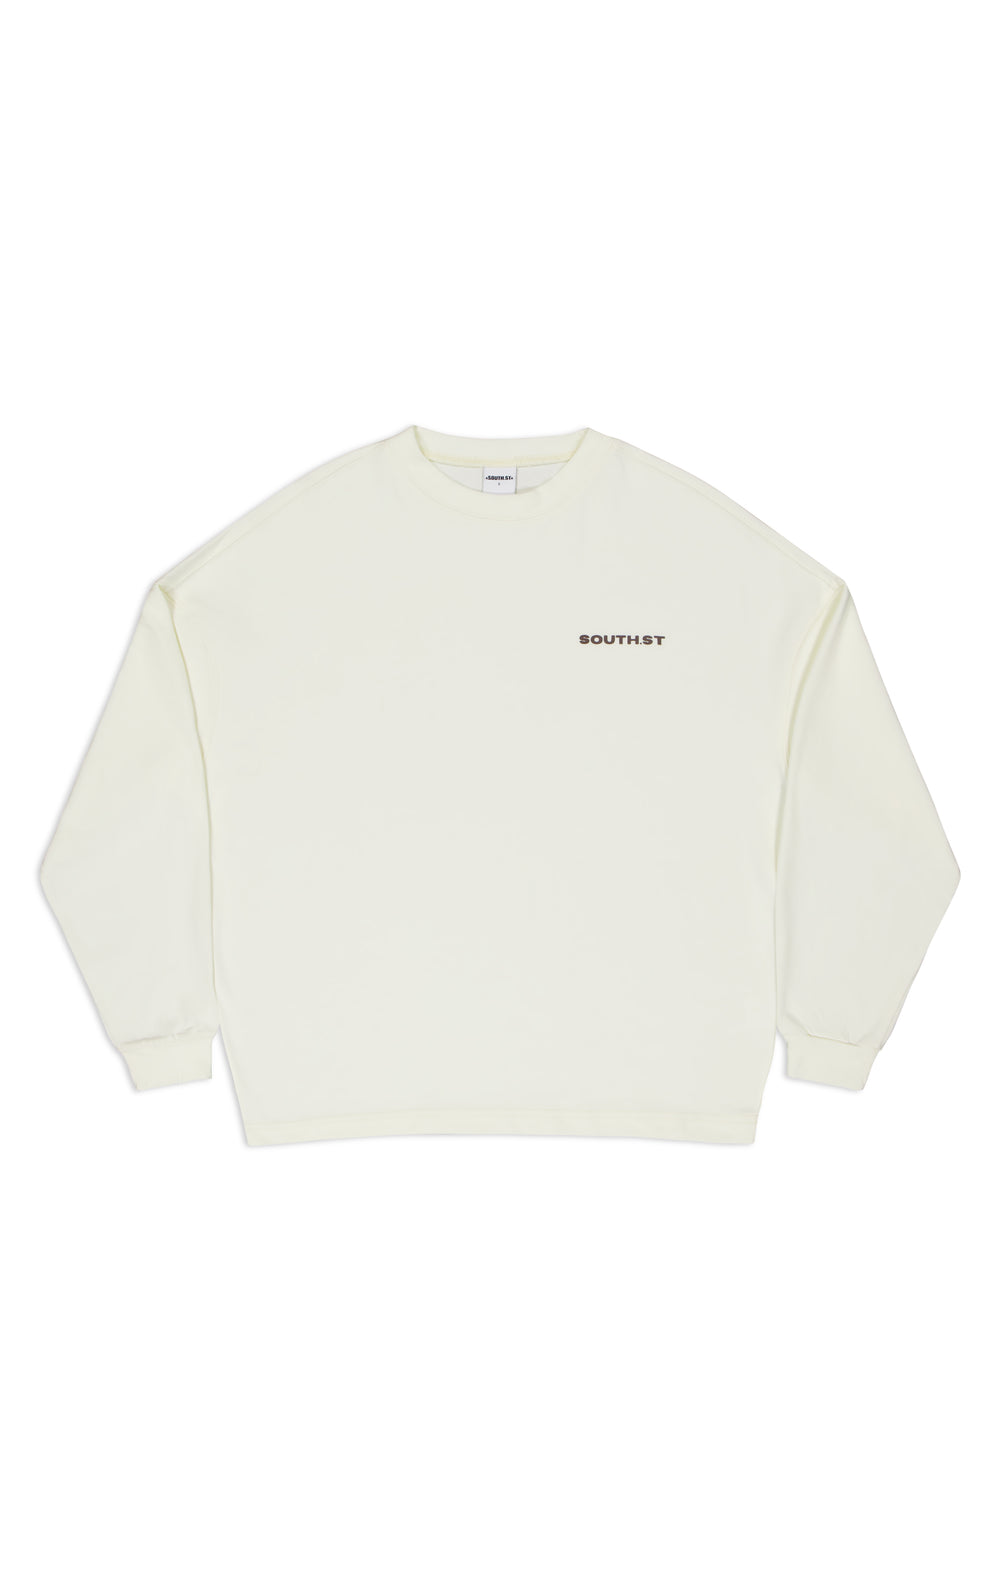 MANNERS LONG SLEEVE TEE - White/Brown